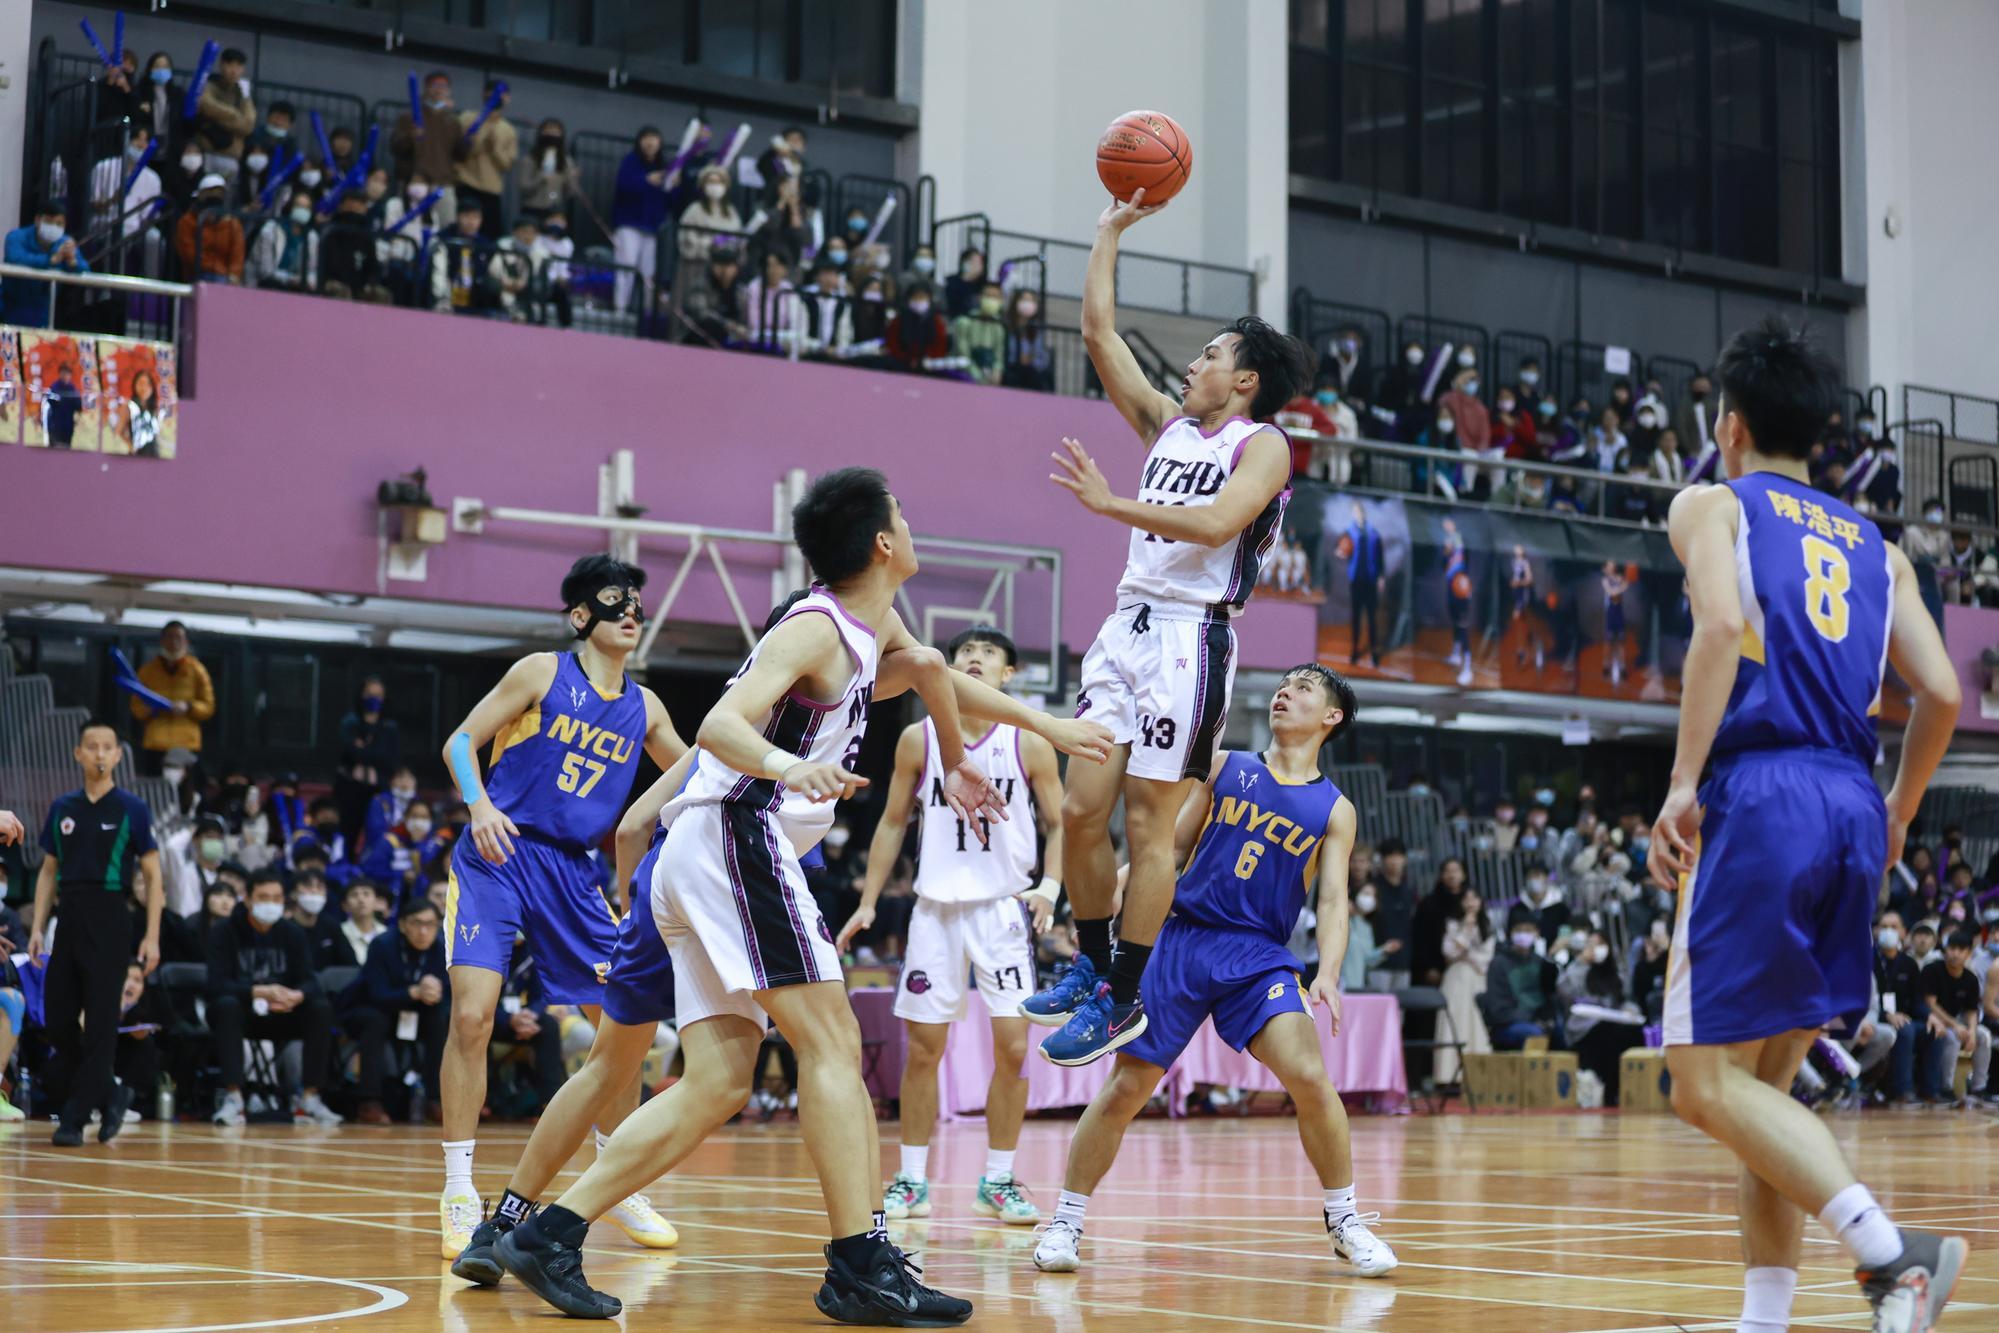 NTHU’s Ciou, Liang (邱亮) (no. 43) in action on the basketball court.